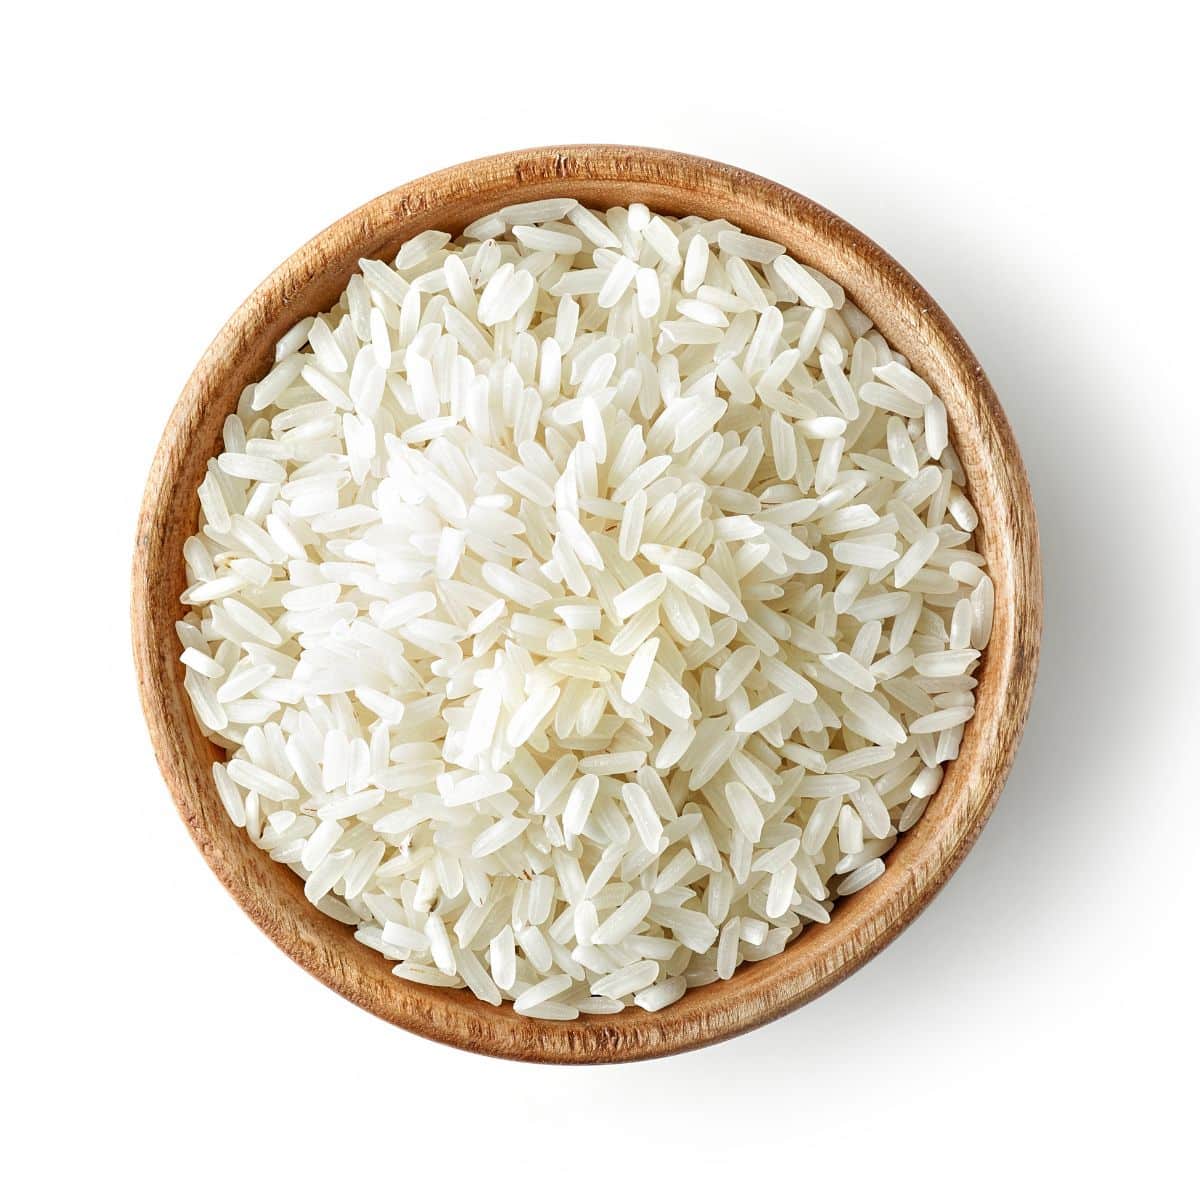 Wehani rice in a wood bowl n a white background.